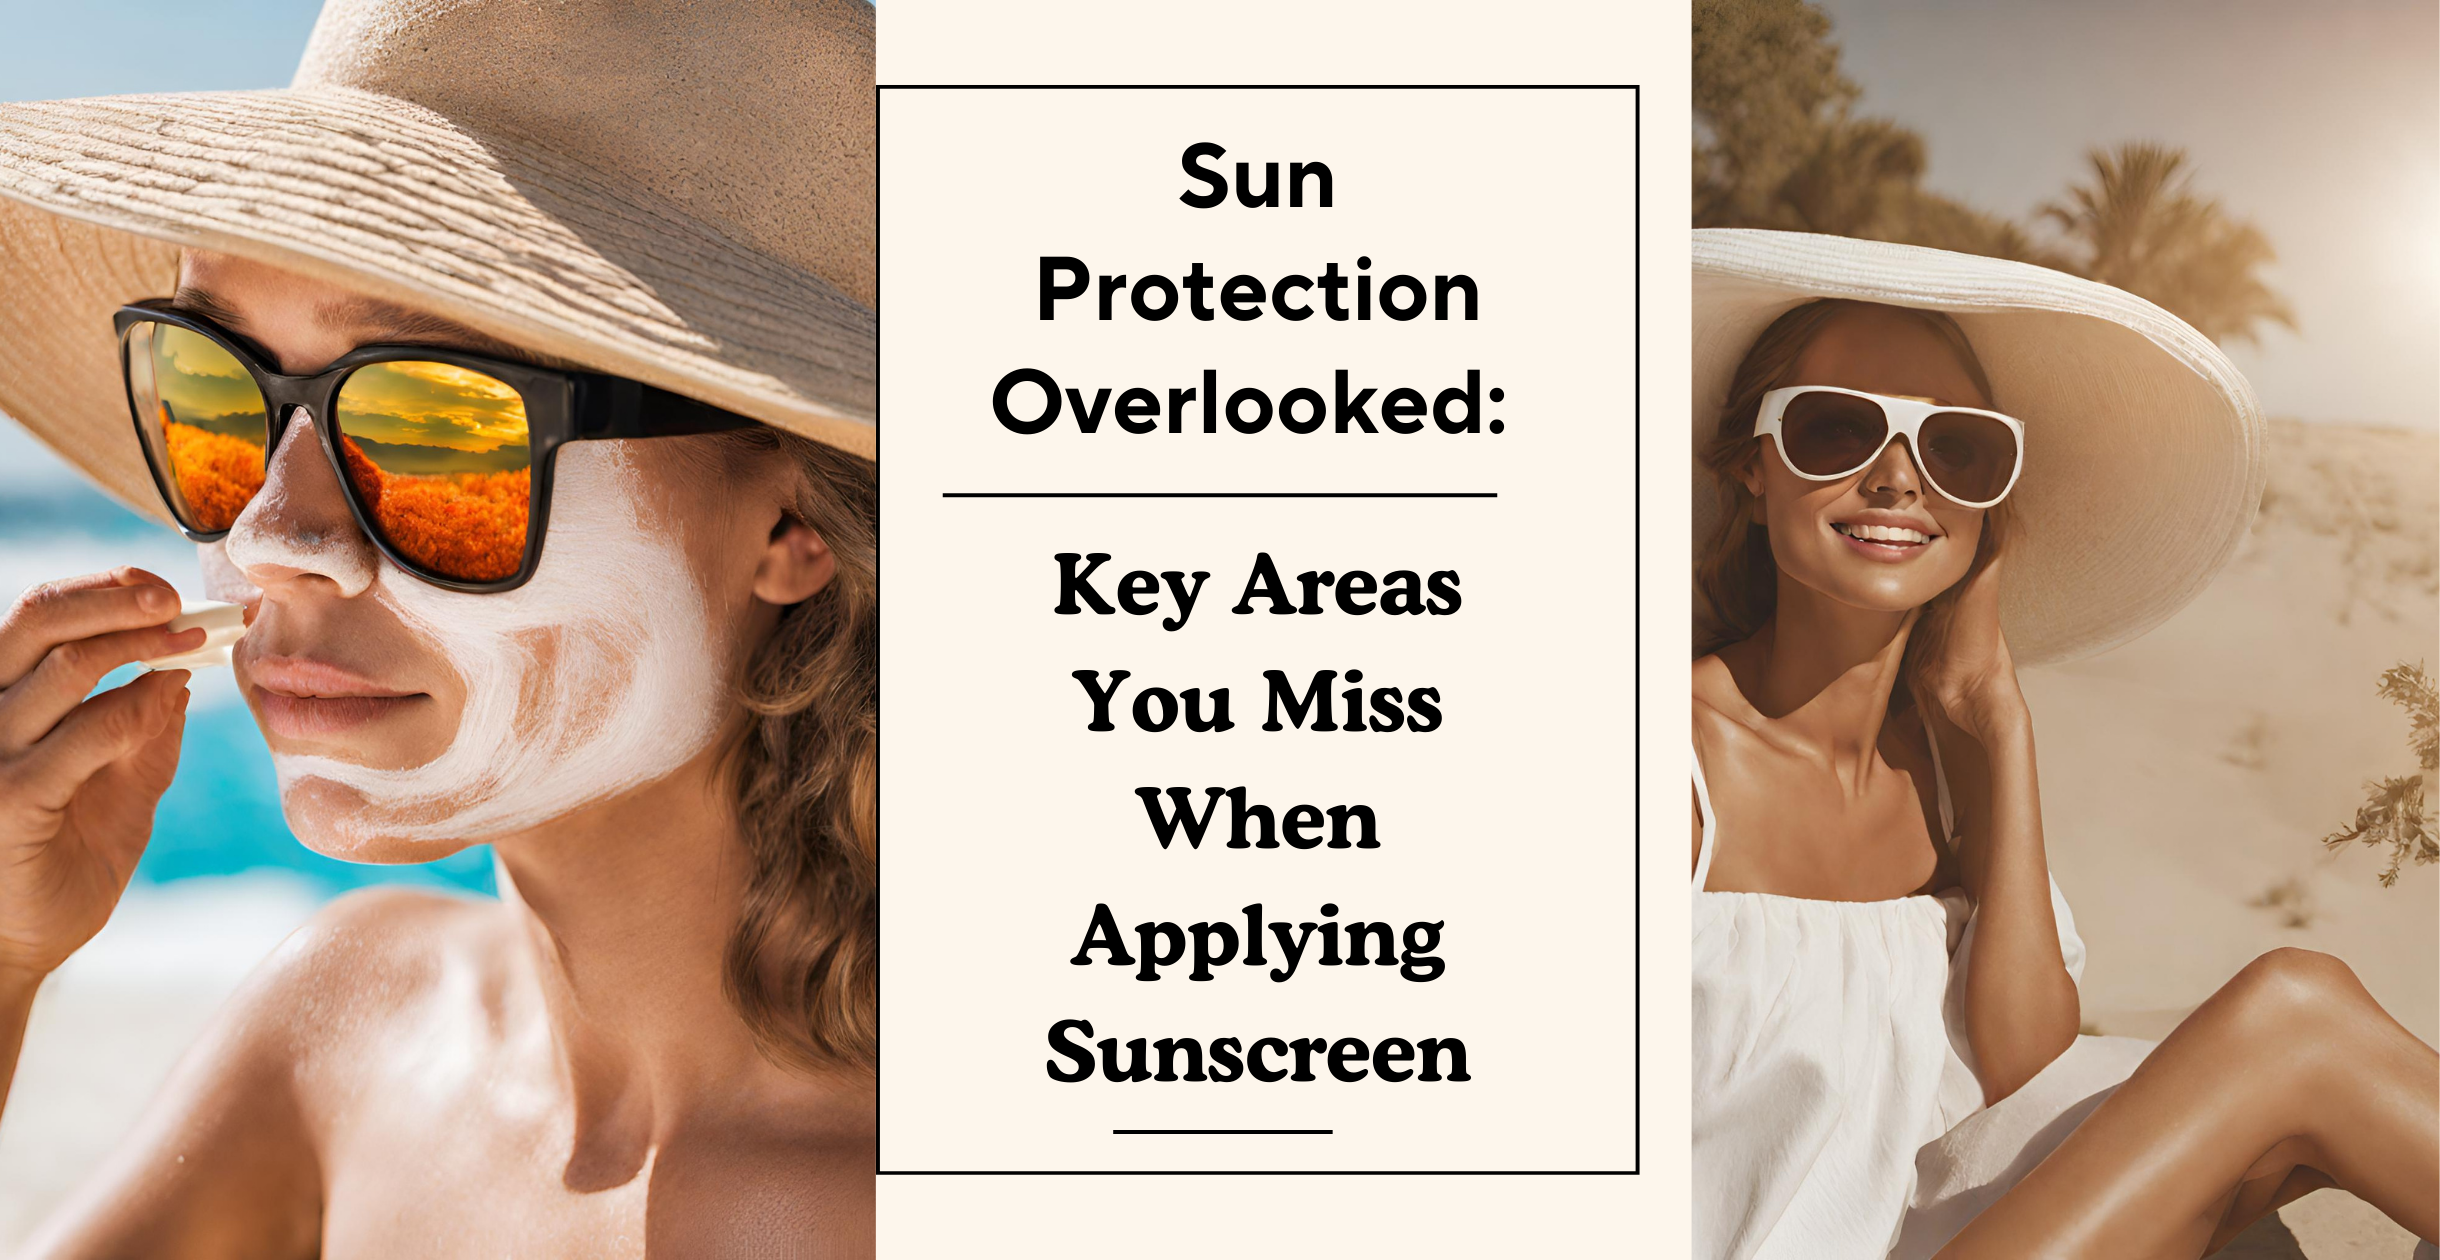 Sun Protection Overlooked: Key Areas You Miss When Applying Sunscreen